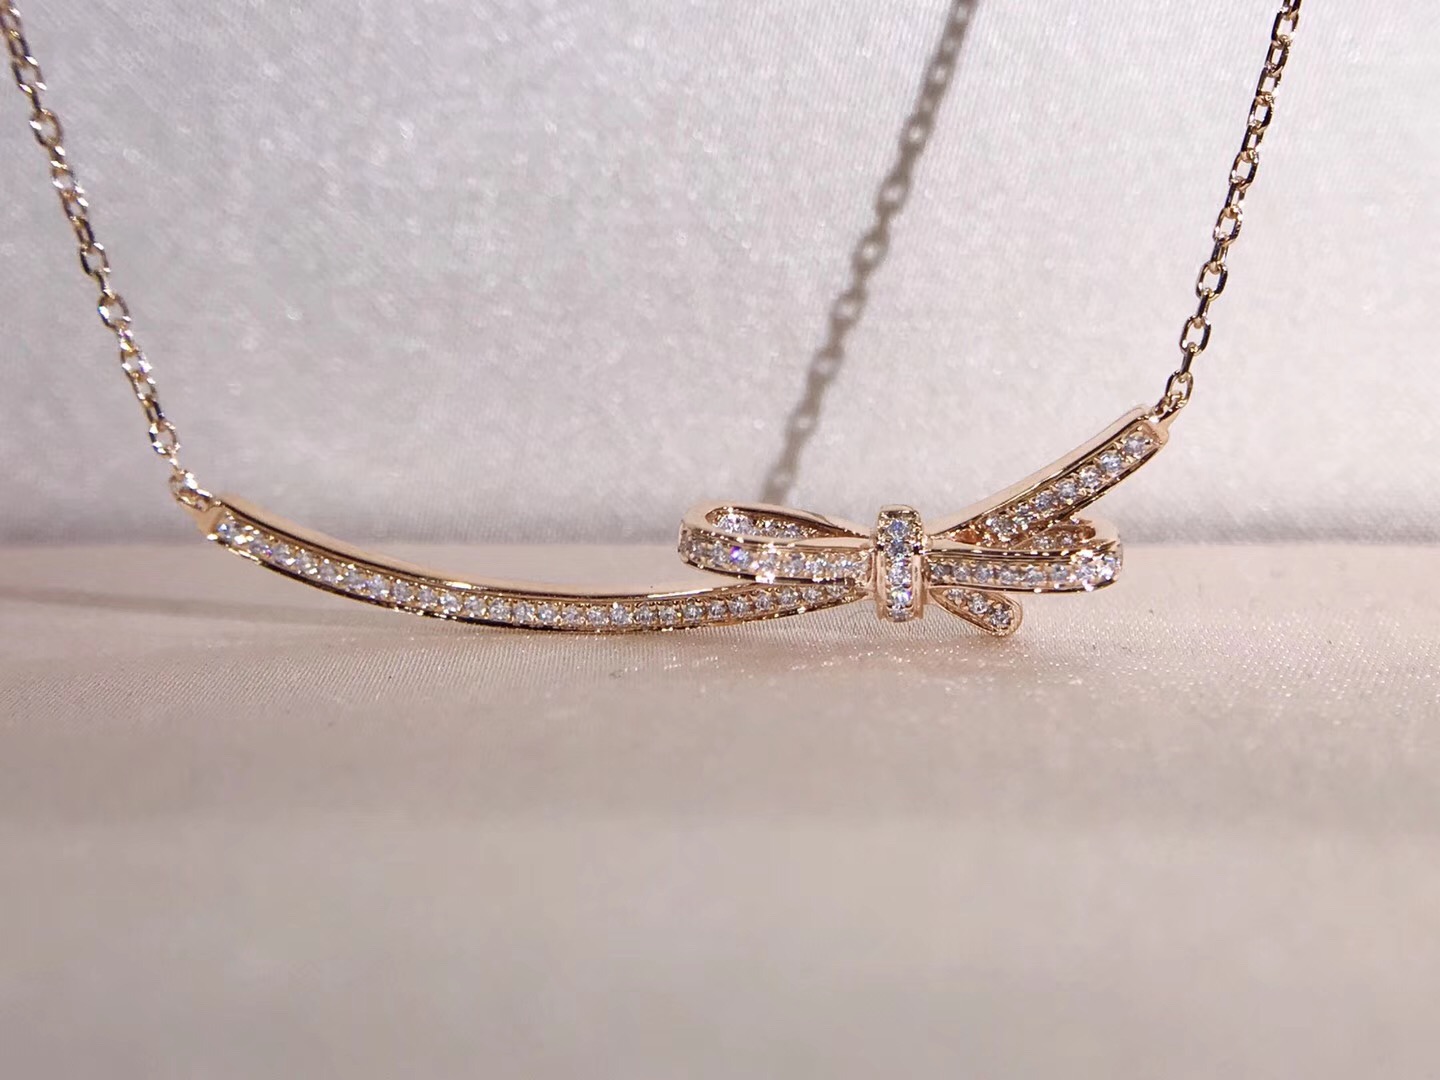 N00370 Bowknot Shaped Diamond Necklace in 18k White Gold/18k Gold